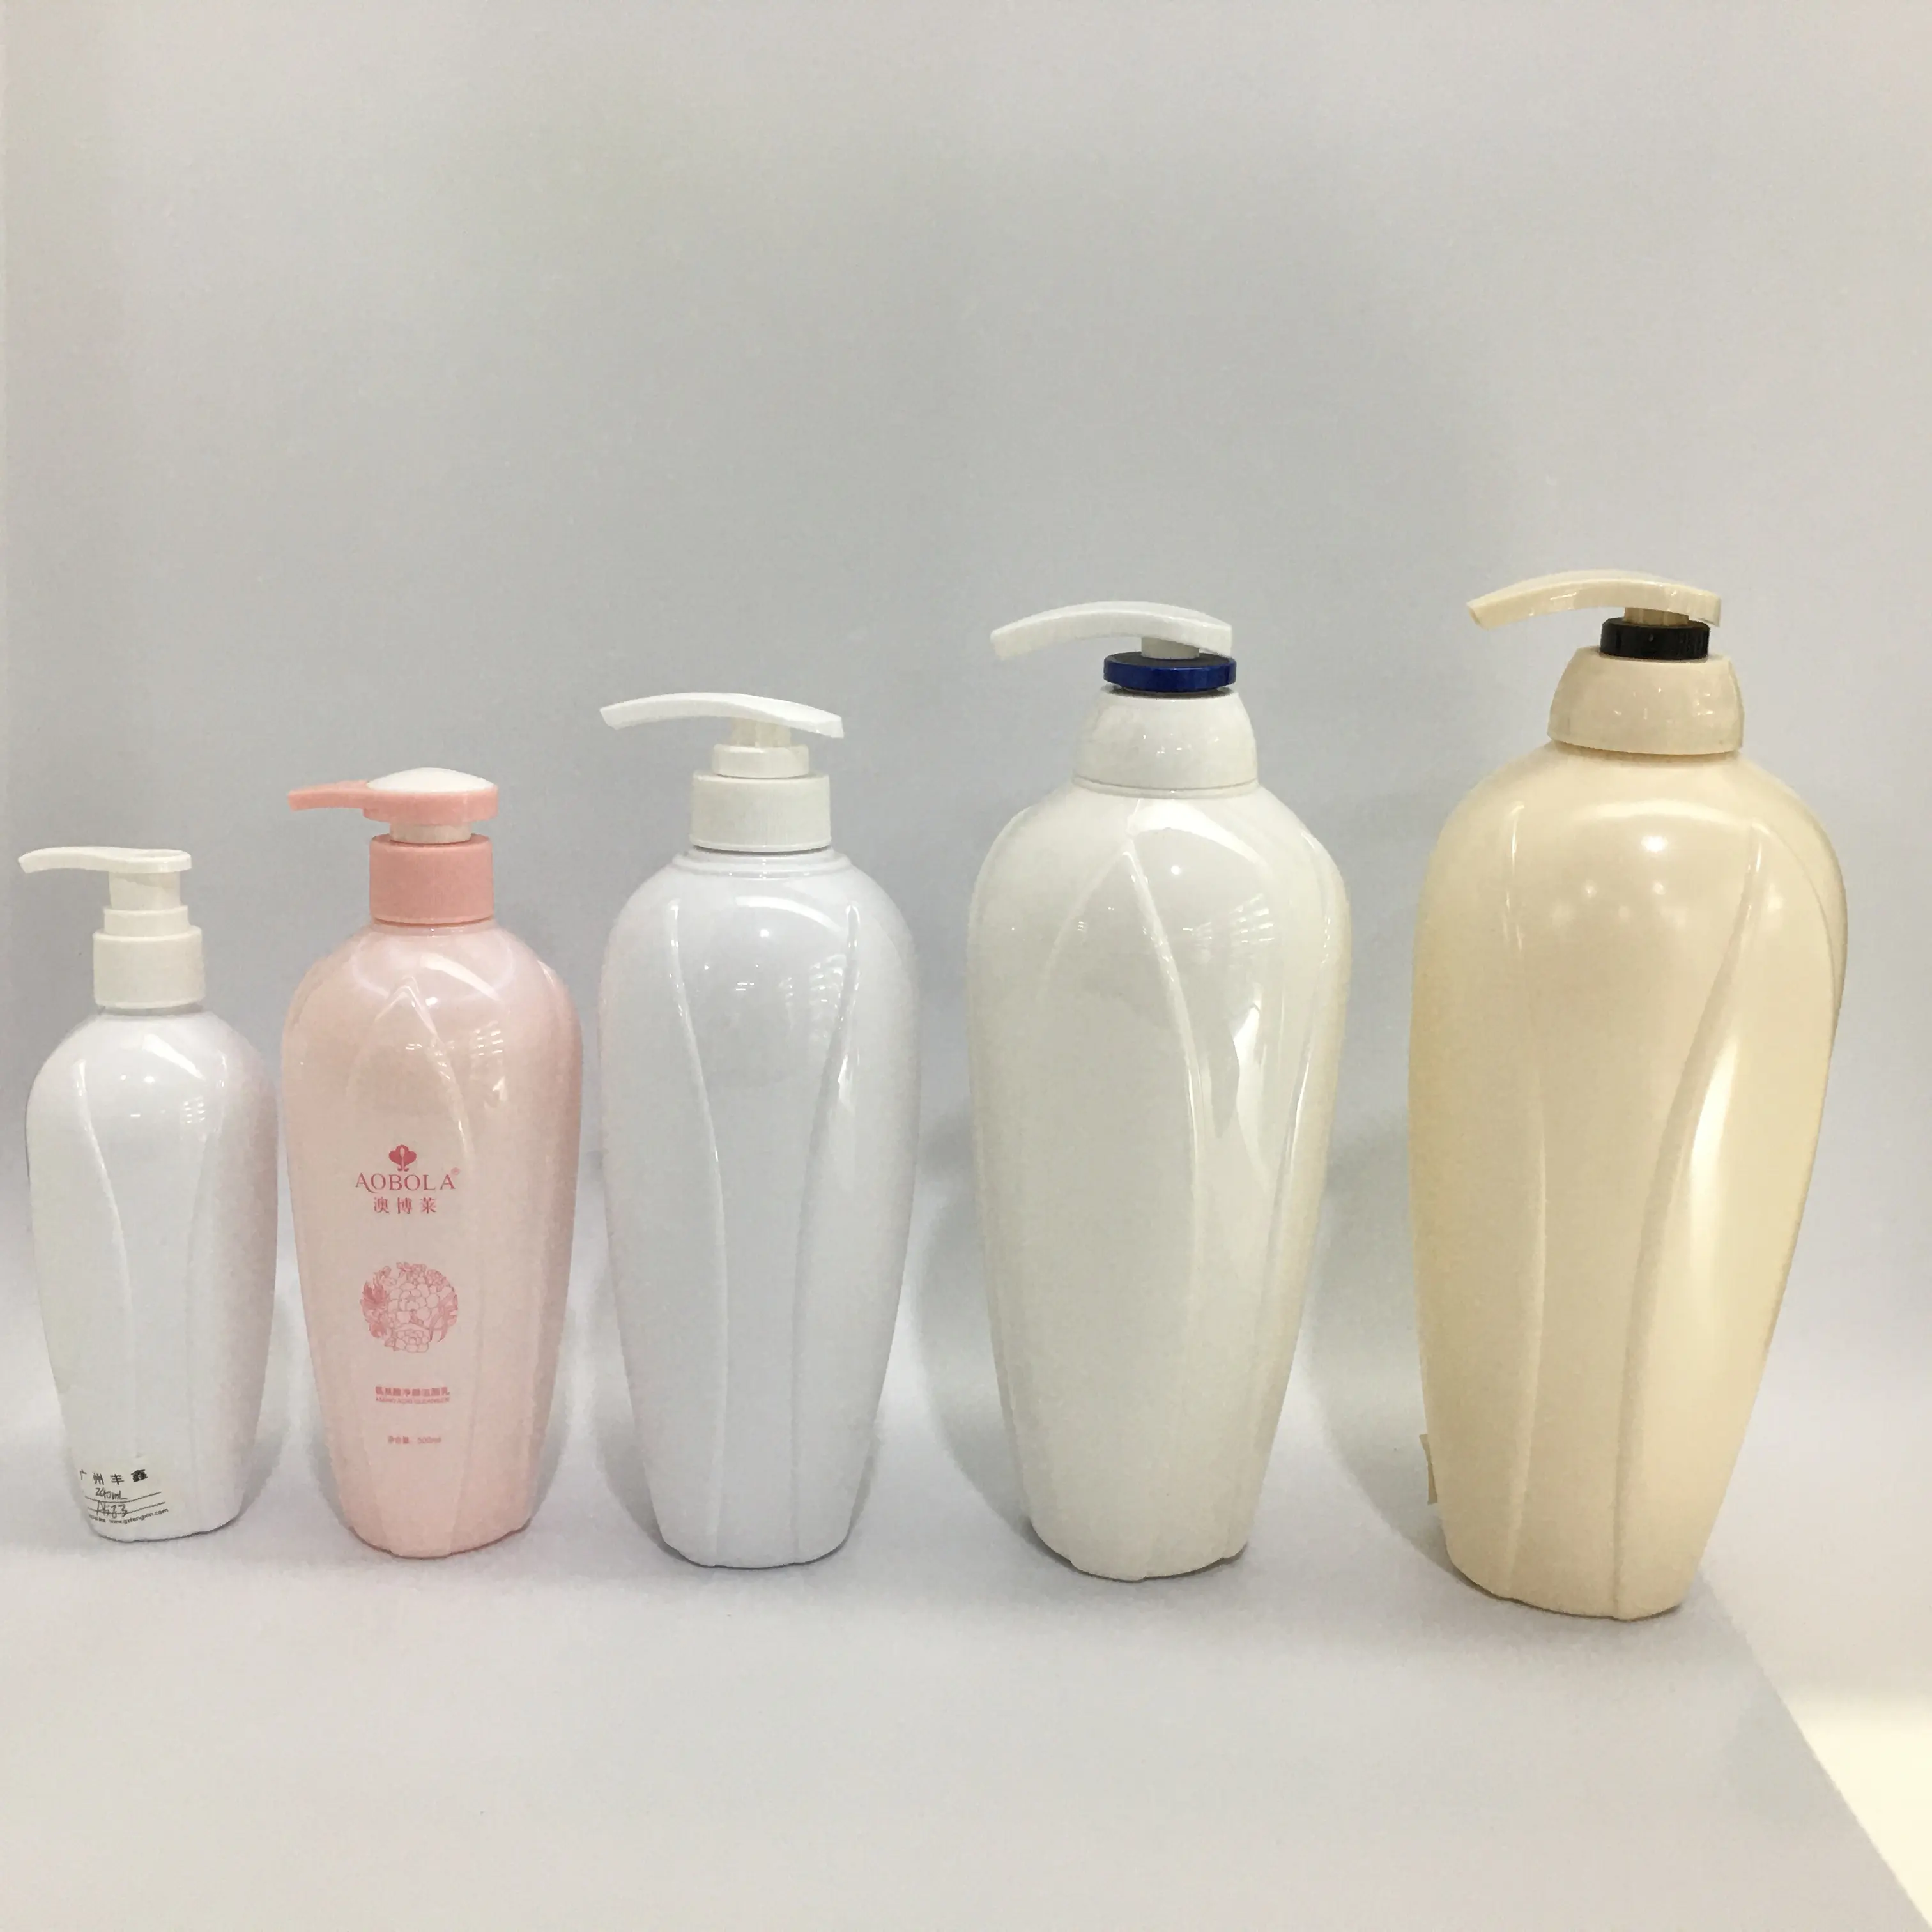 High Quality Luxury Morandi Shampoo And Conditioner Body Wash Bottles Plastic Lotion Container Pump Bottle